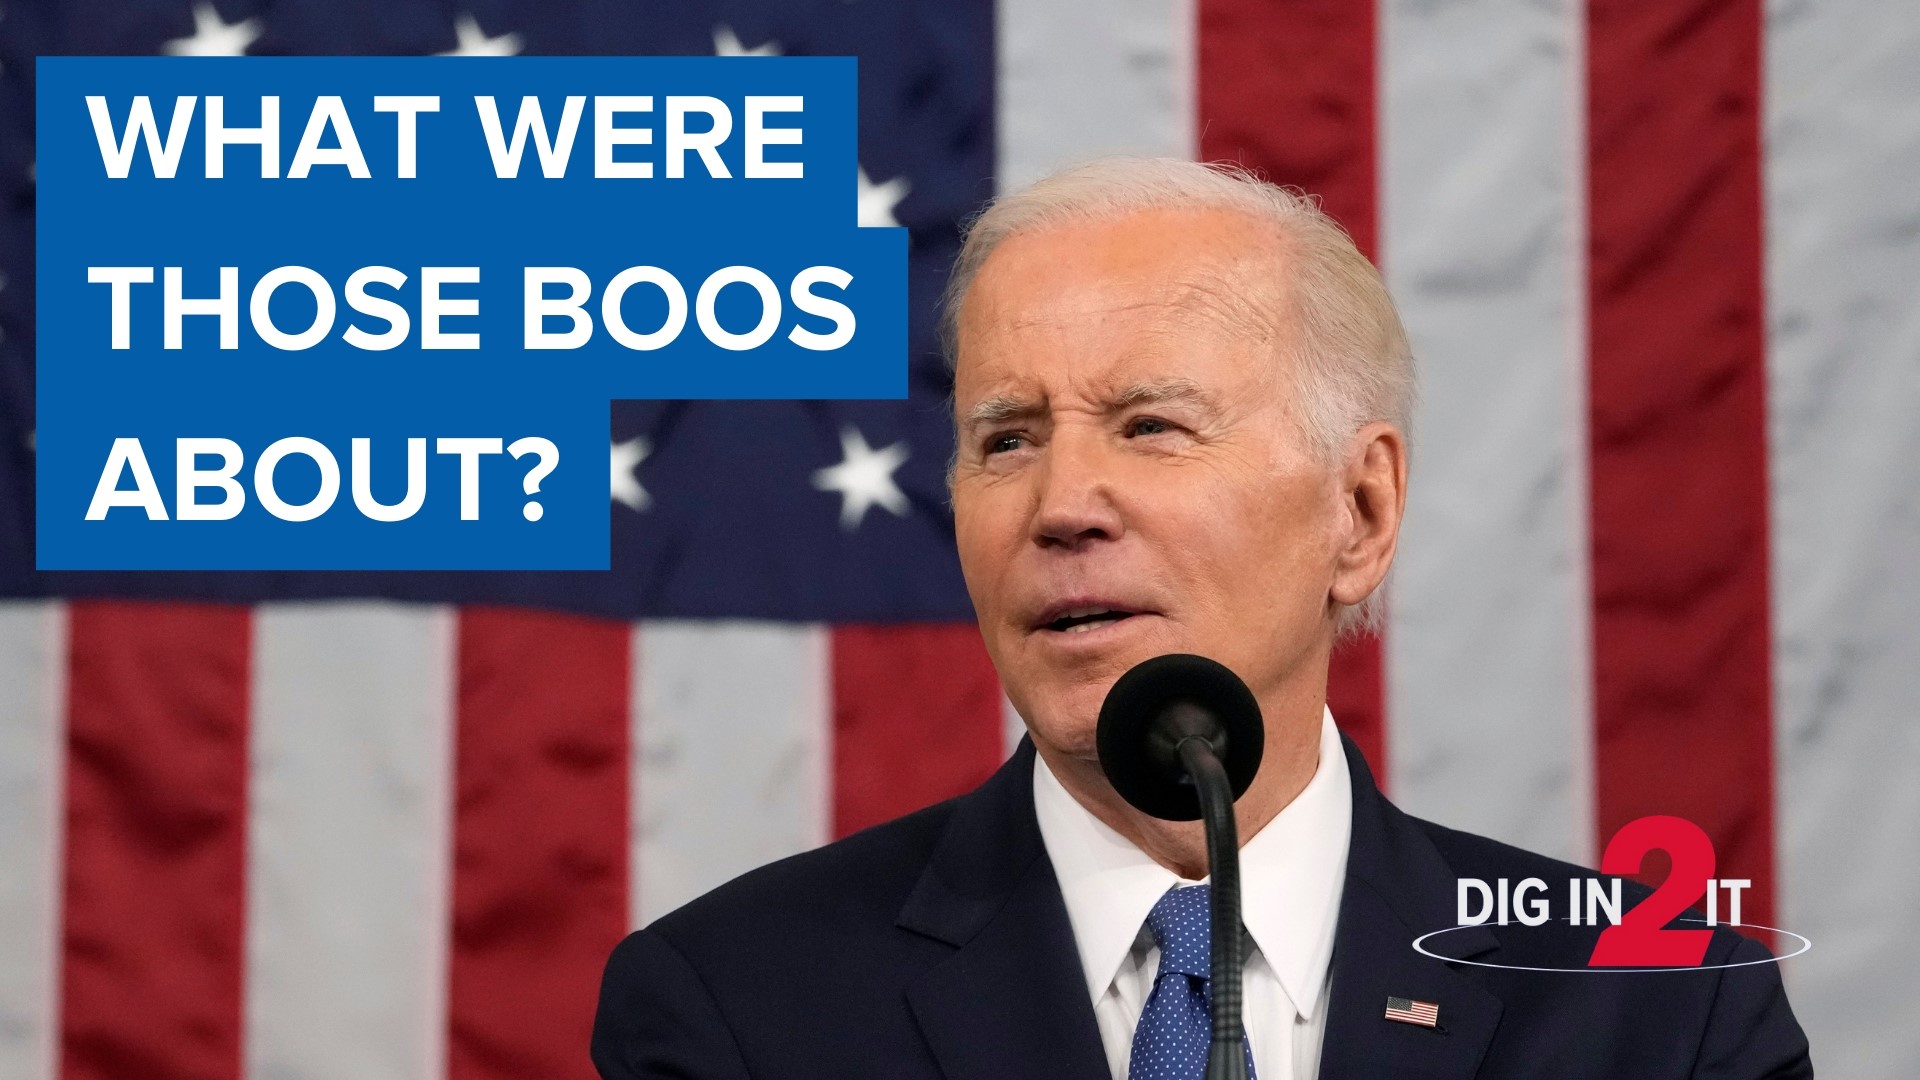 President Biden gave his second State of the Union address Tuesday night. He said most Republicans want to get rid of Medicare. We fact-checked that claim.